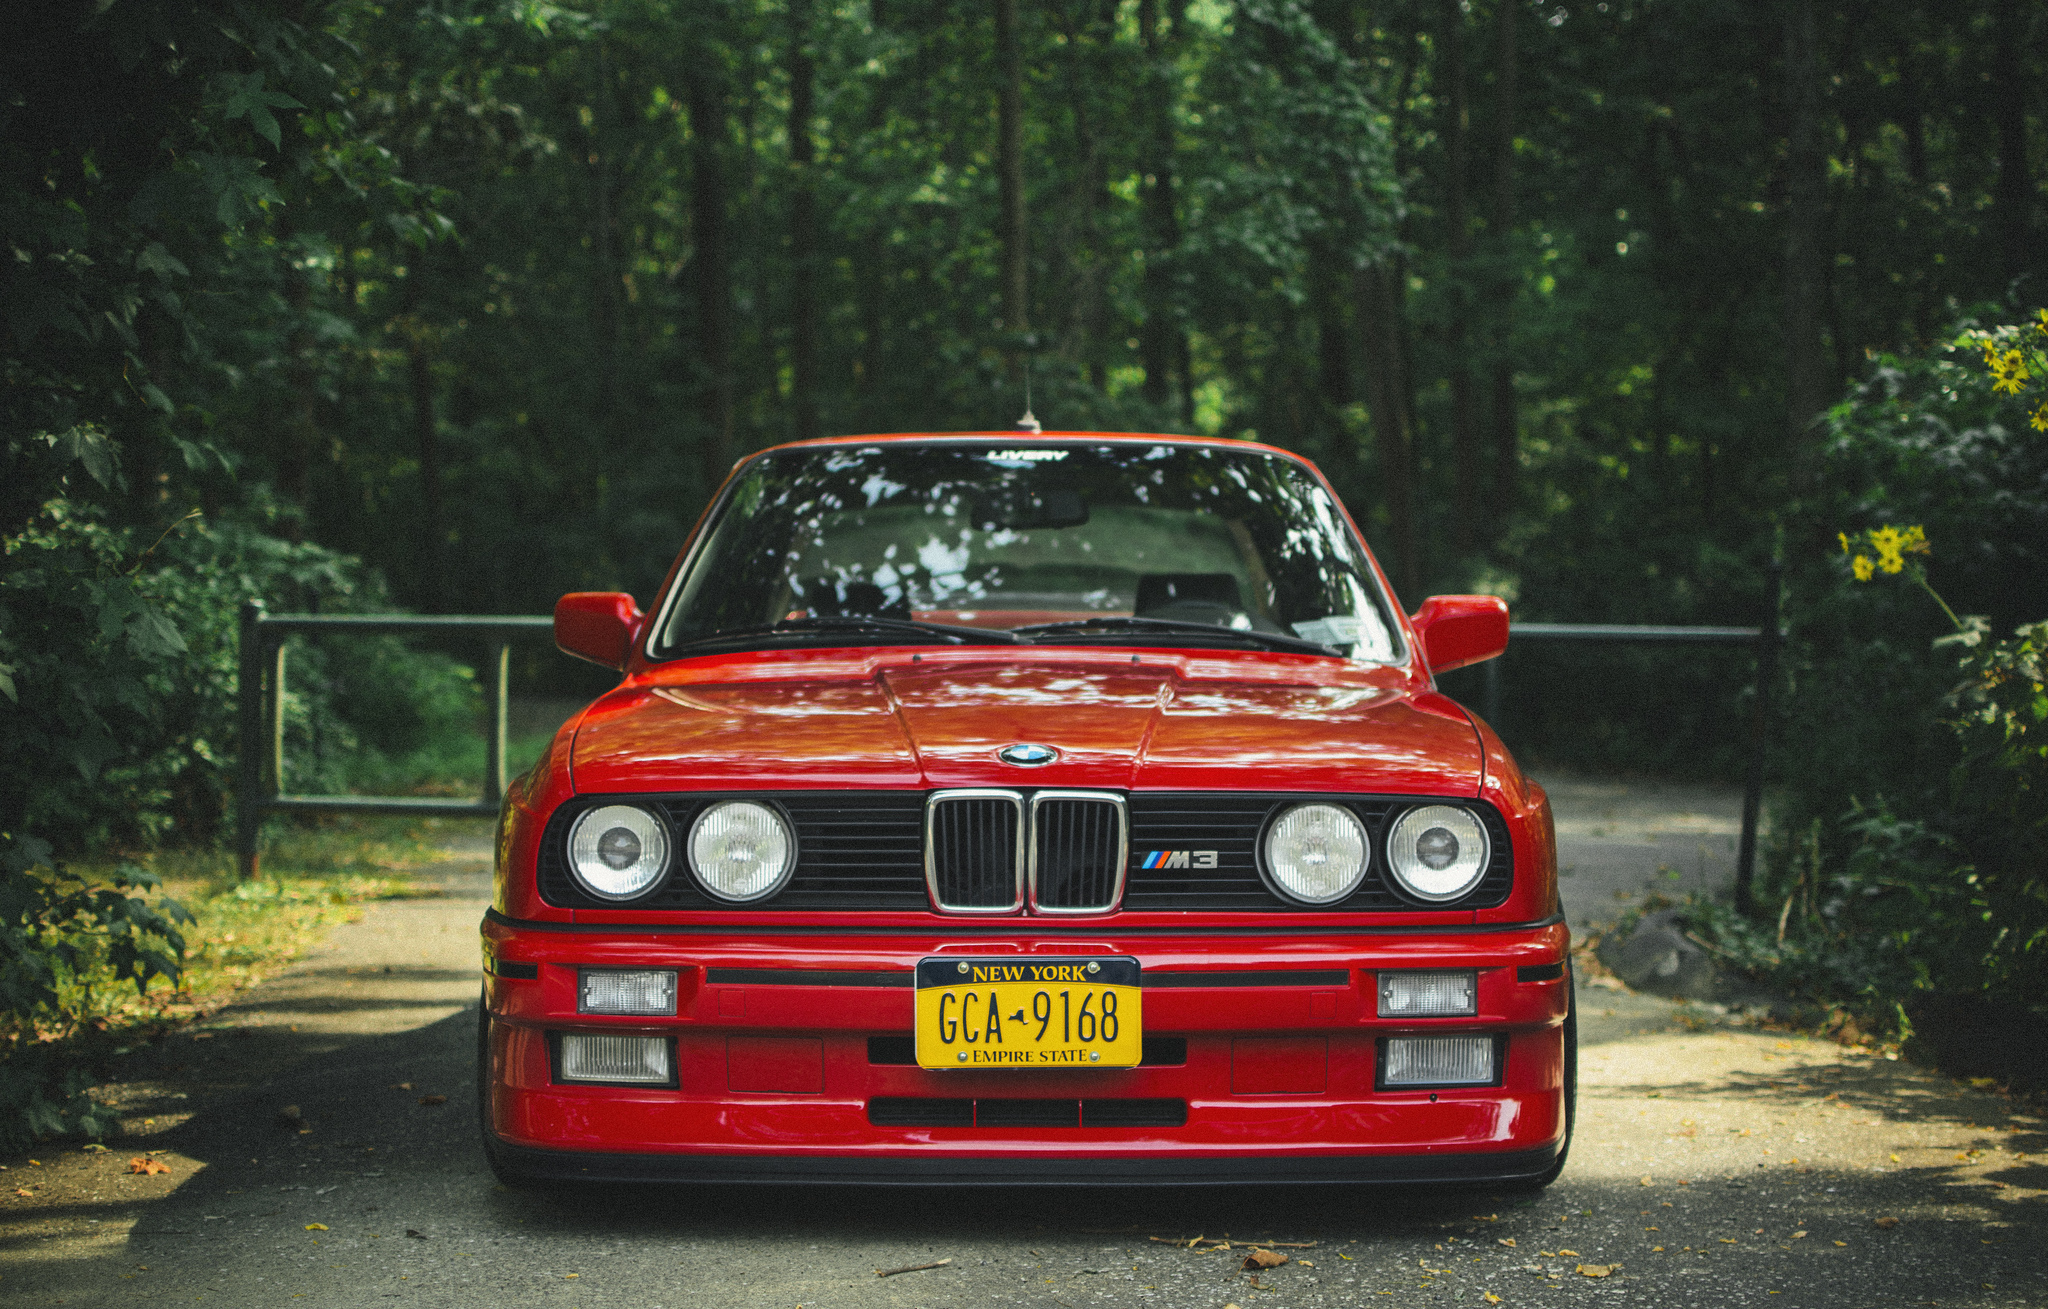 149123 download wallpaper cars, bmw, tuning, red, m3, e30 screensavers and pictures for free